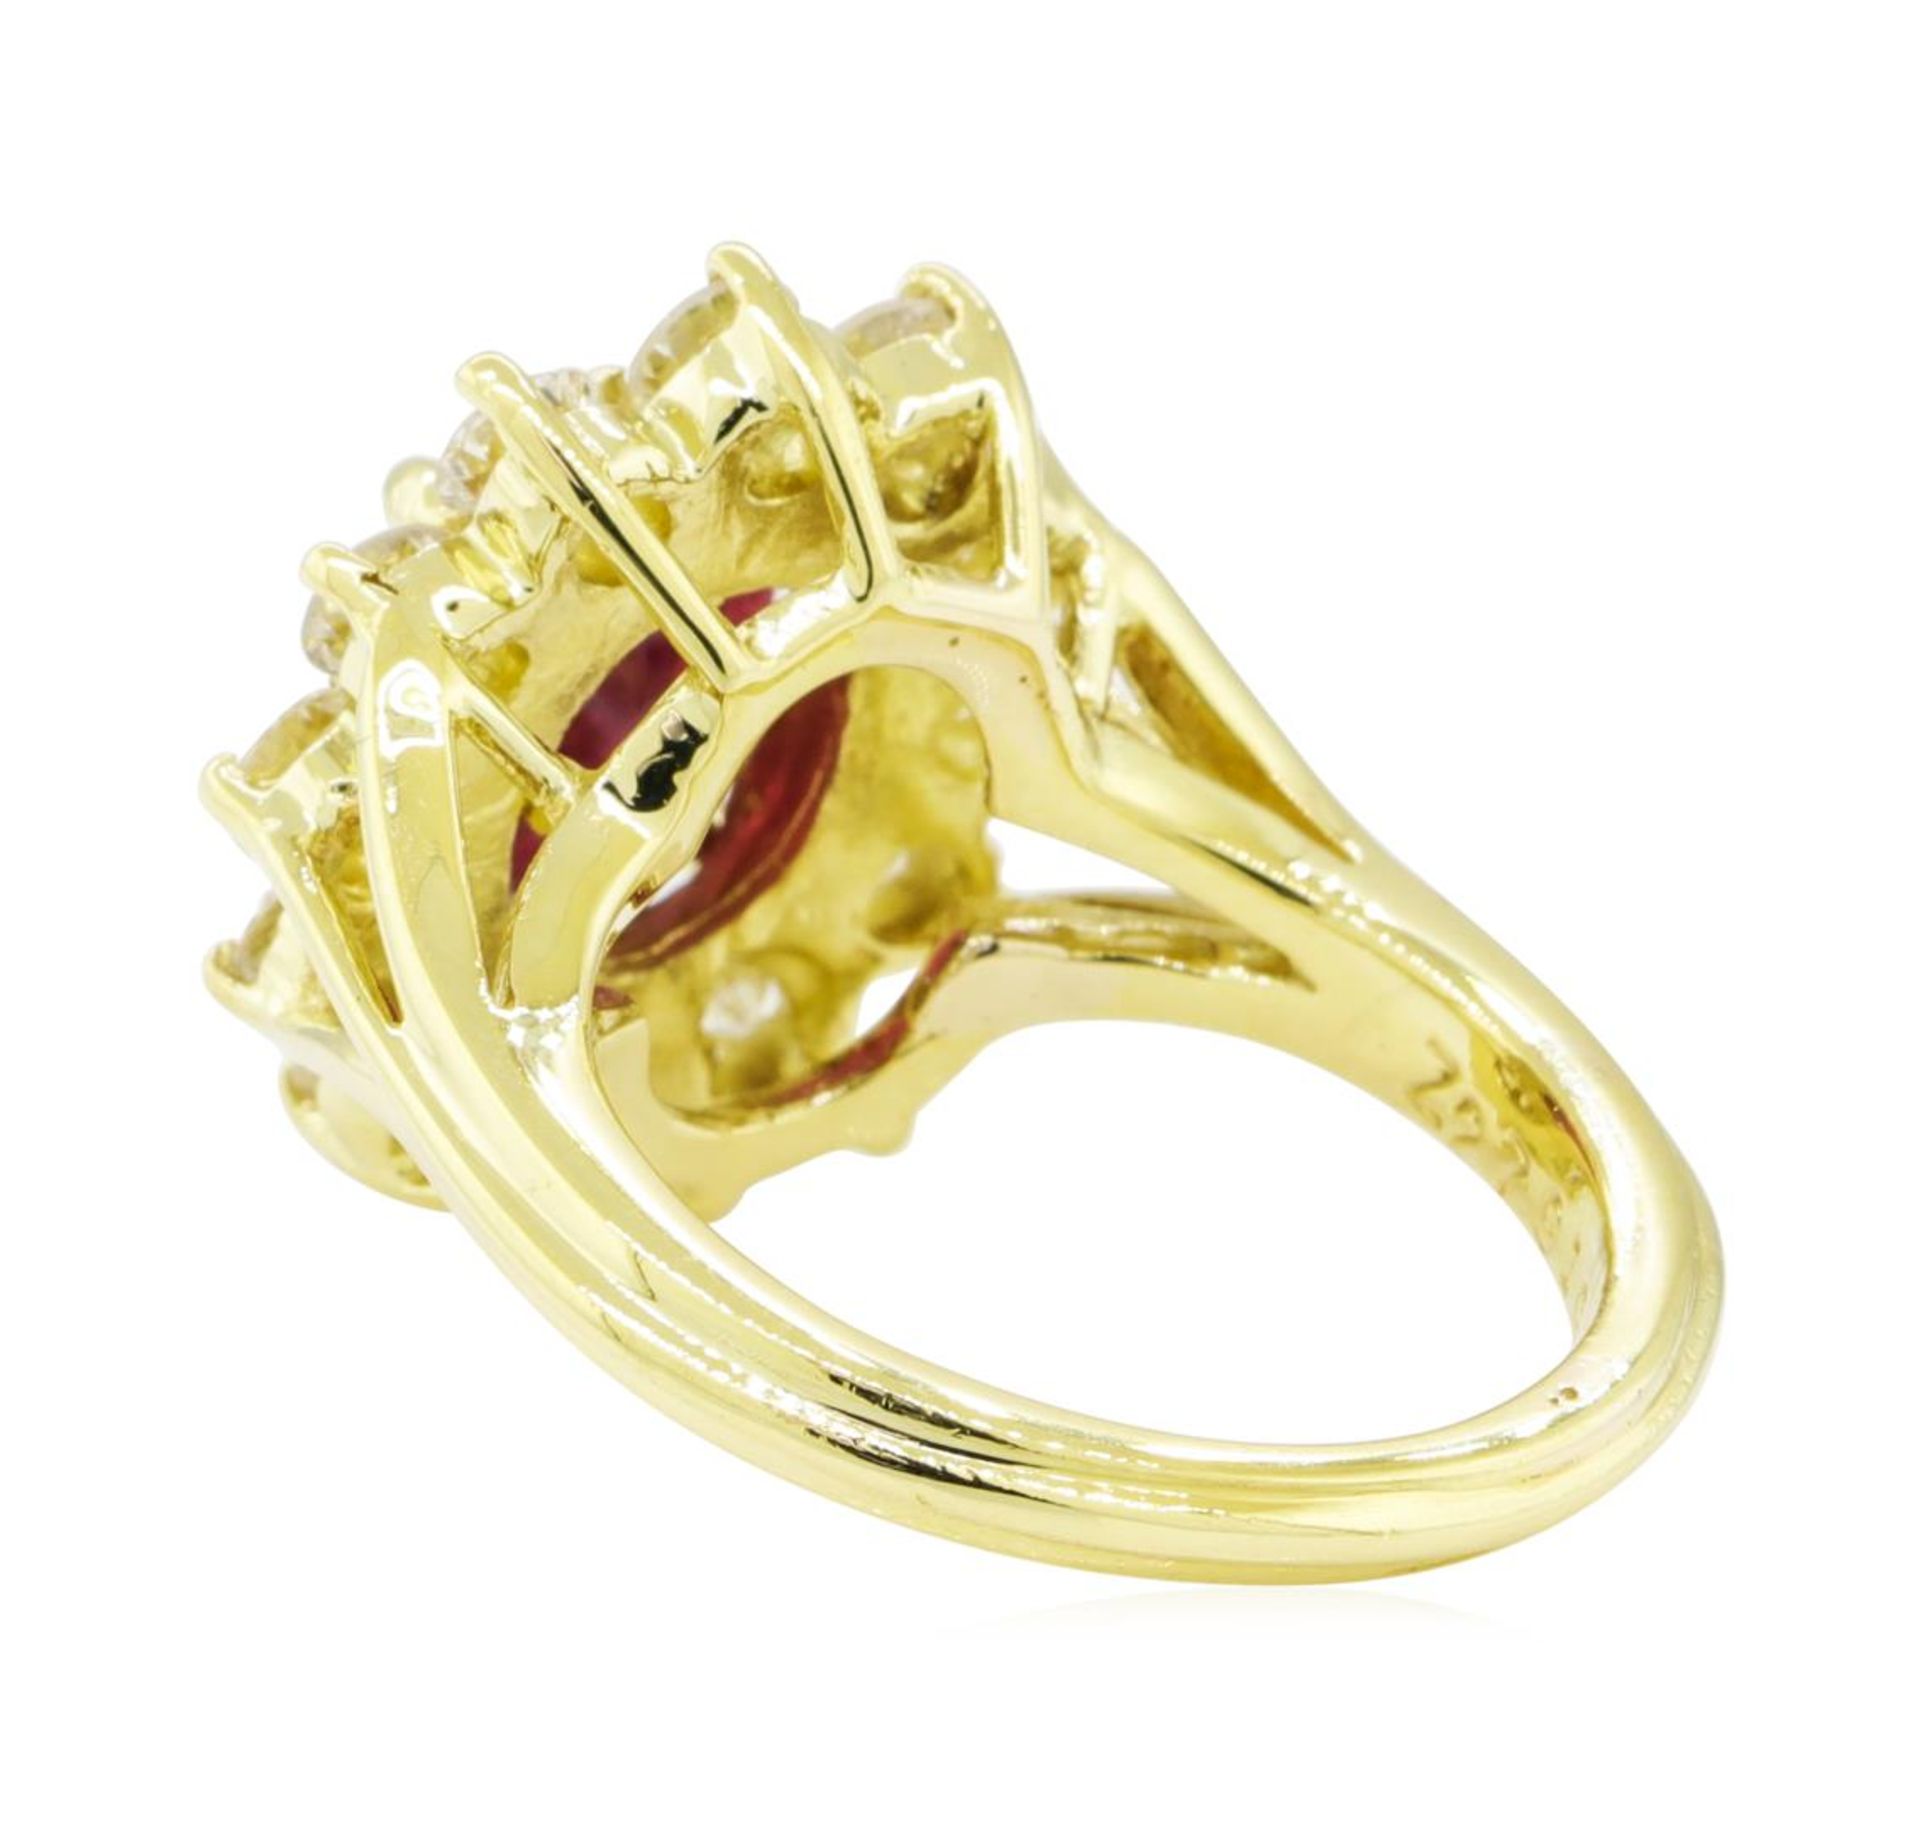 5.51 ctw Ruby and Diamond Ring - 18KT Yellow Gold - Image 3 of 5